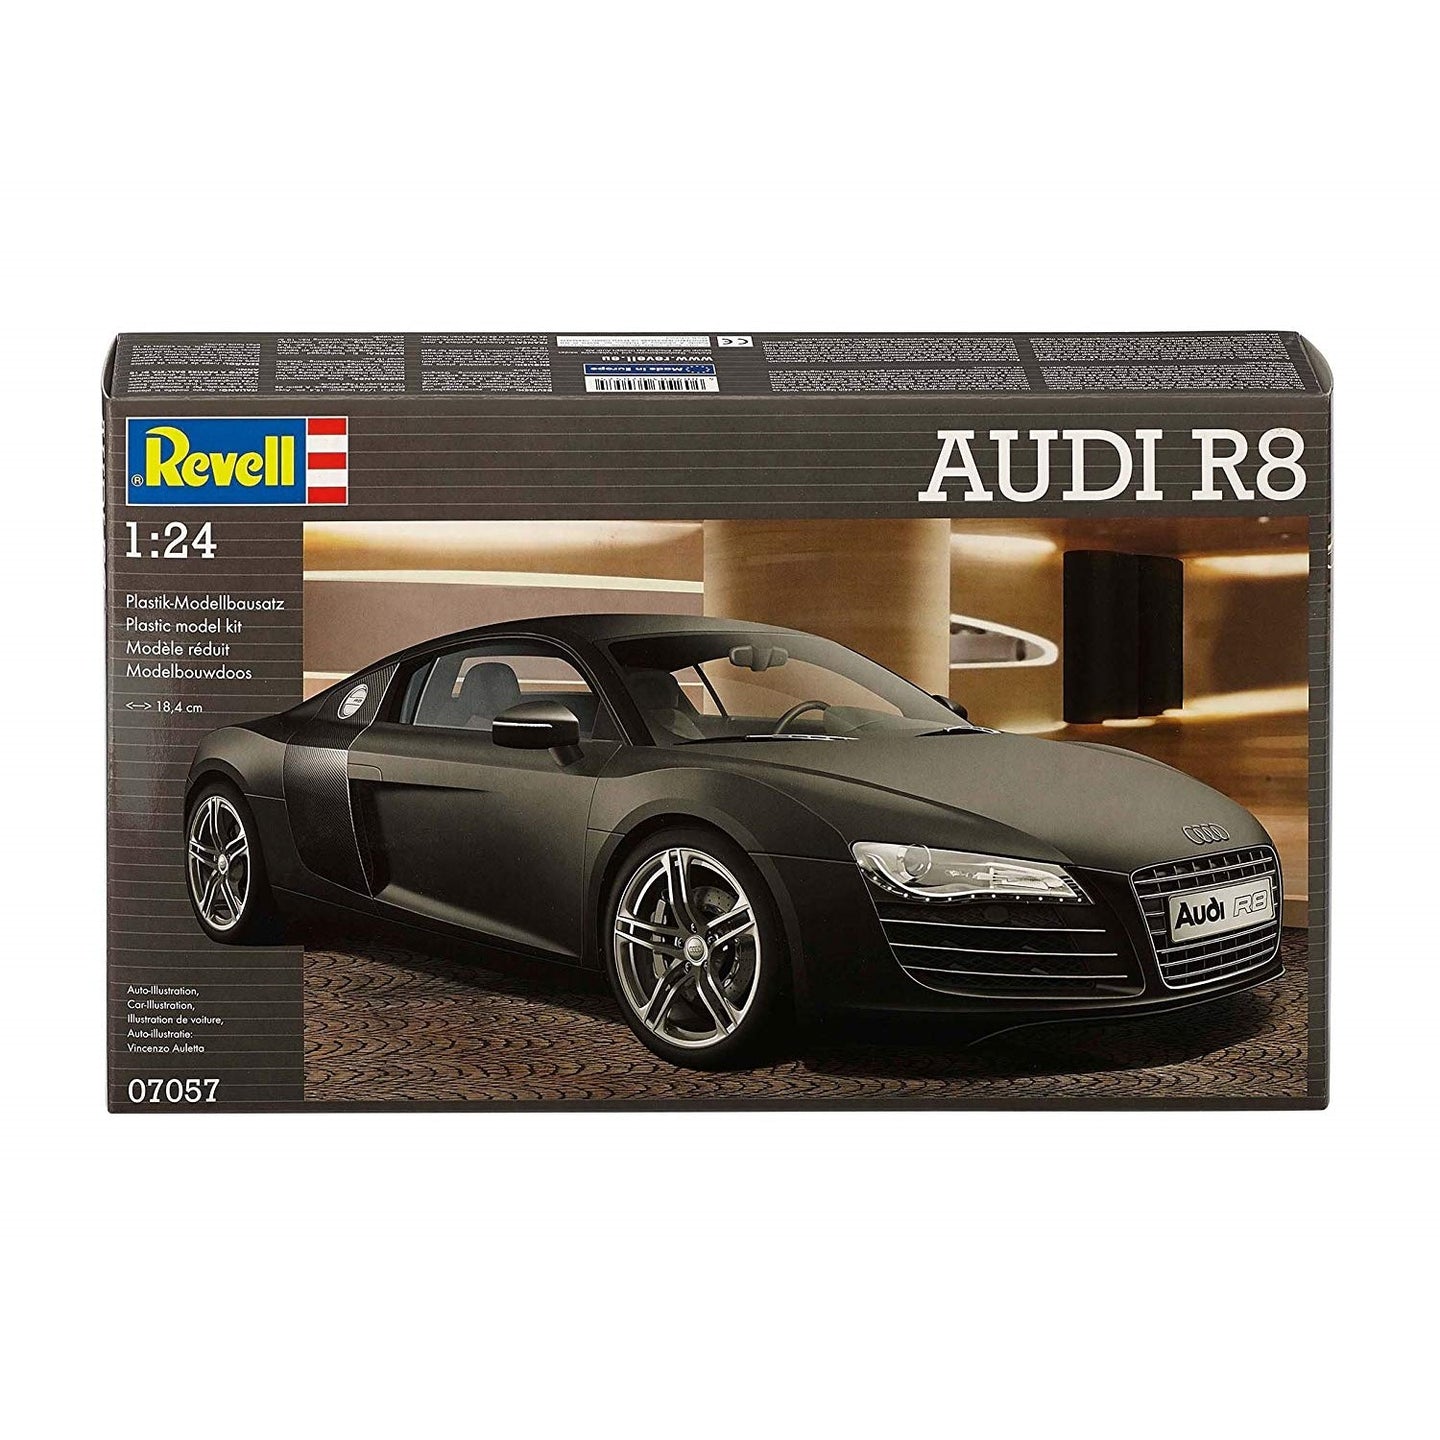 Revell 1/24 Audi R8 Coupe 07057